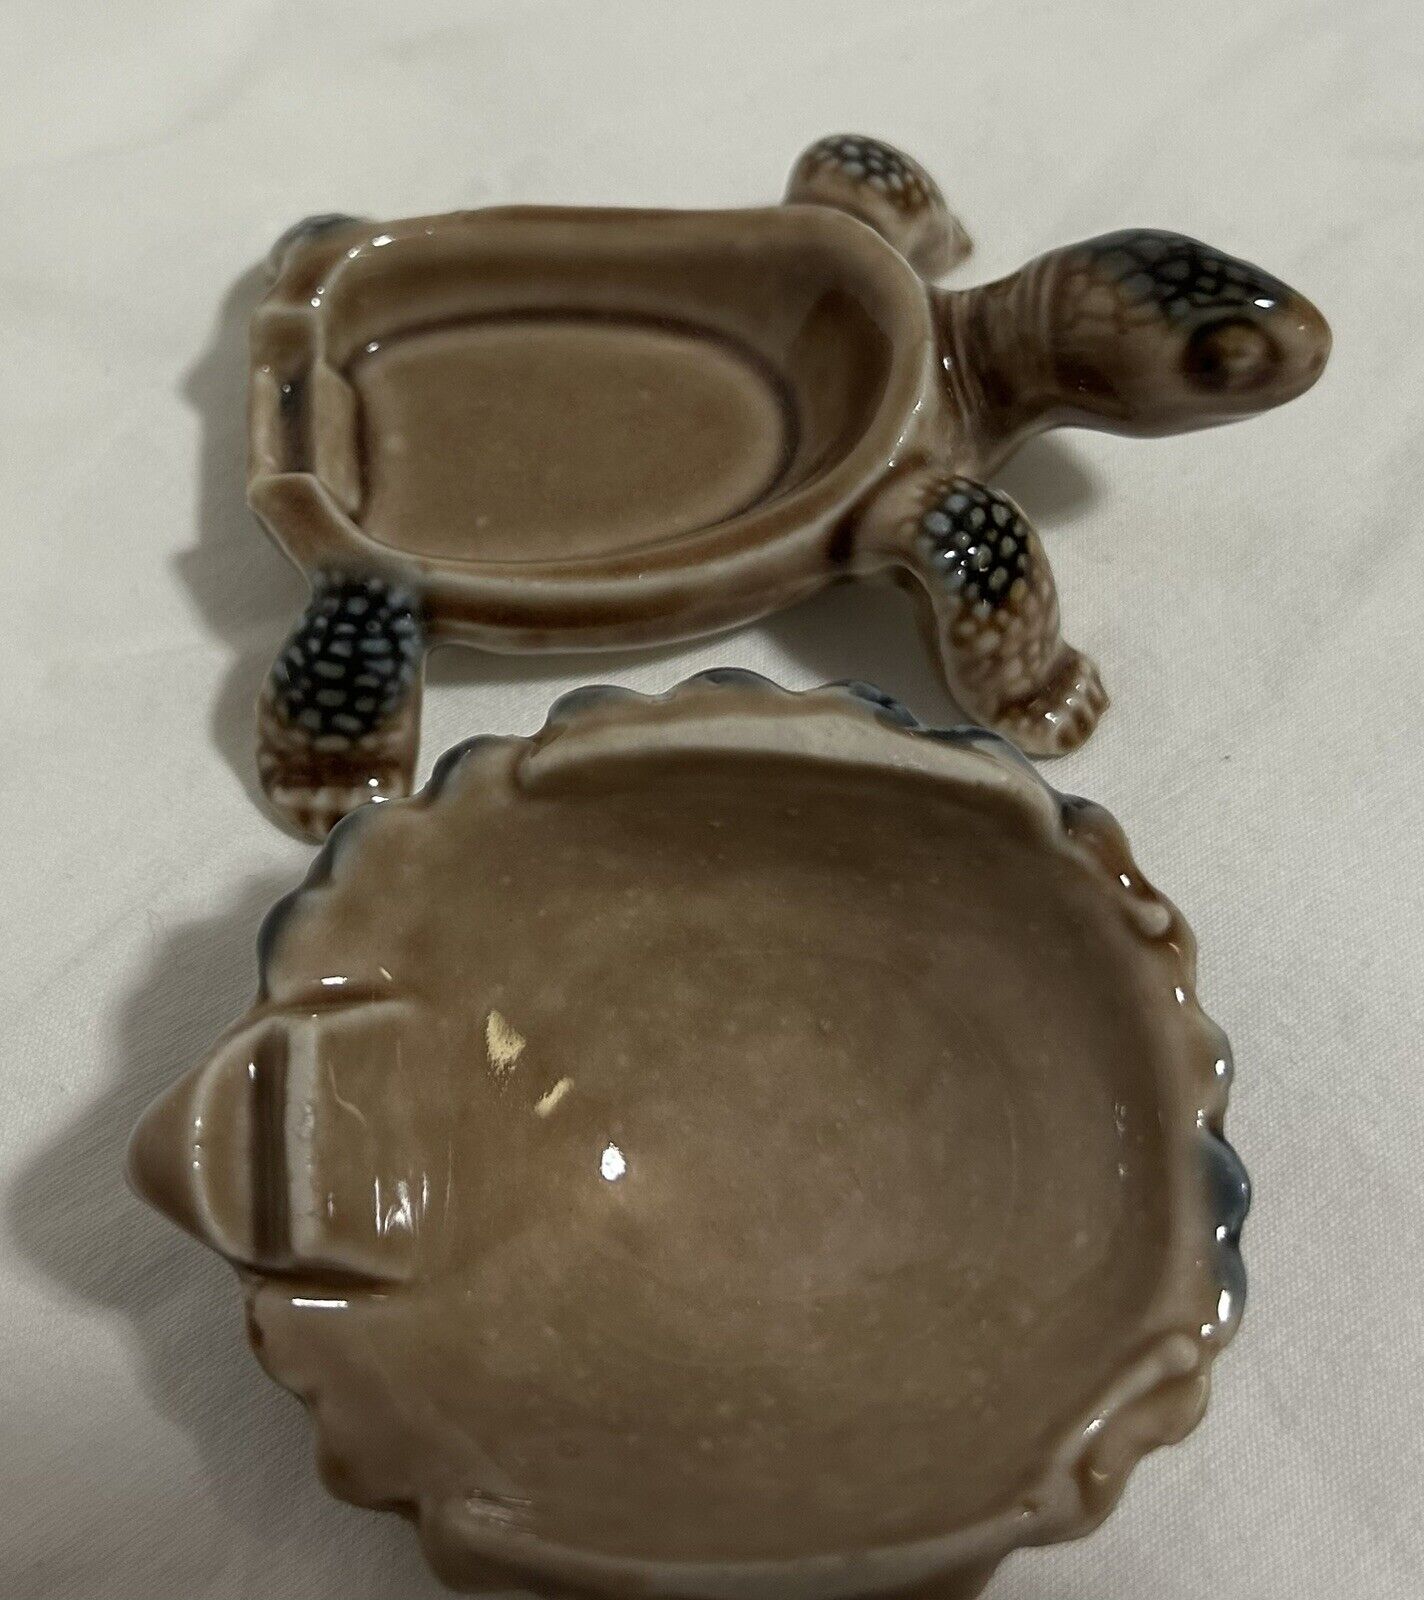 Little Cute Collectible Wade Porcelain Made In England Trinket Holder Shell 